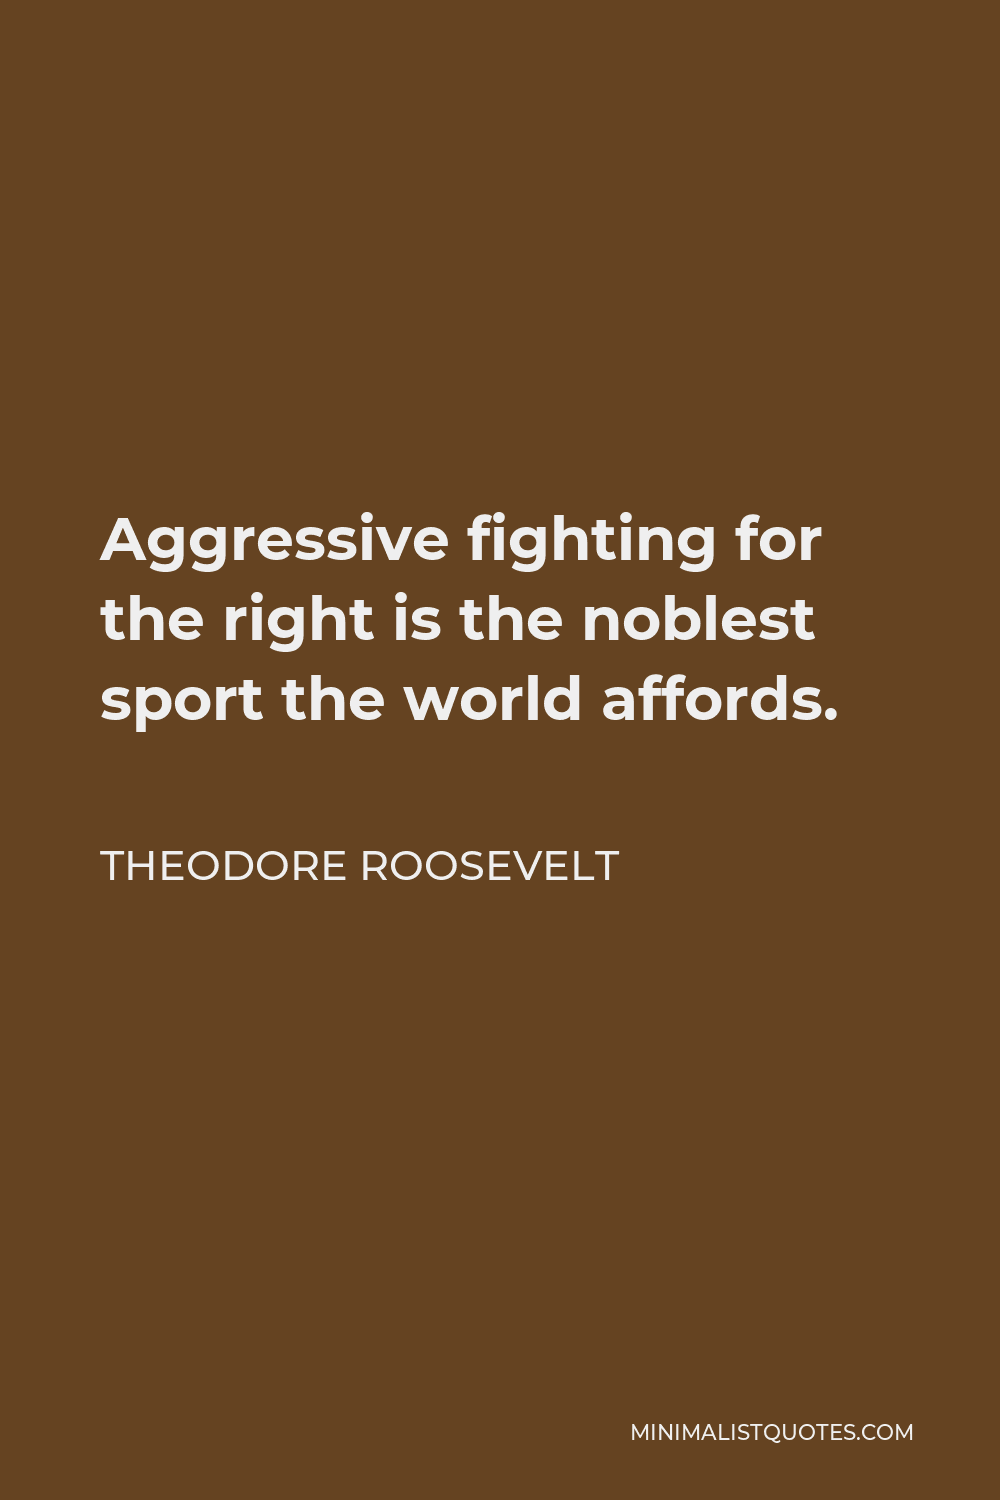 Theodore Roosevelt Quote - Aggressive fighting for the right is the noblest sport the world affords.